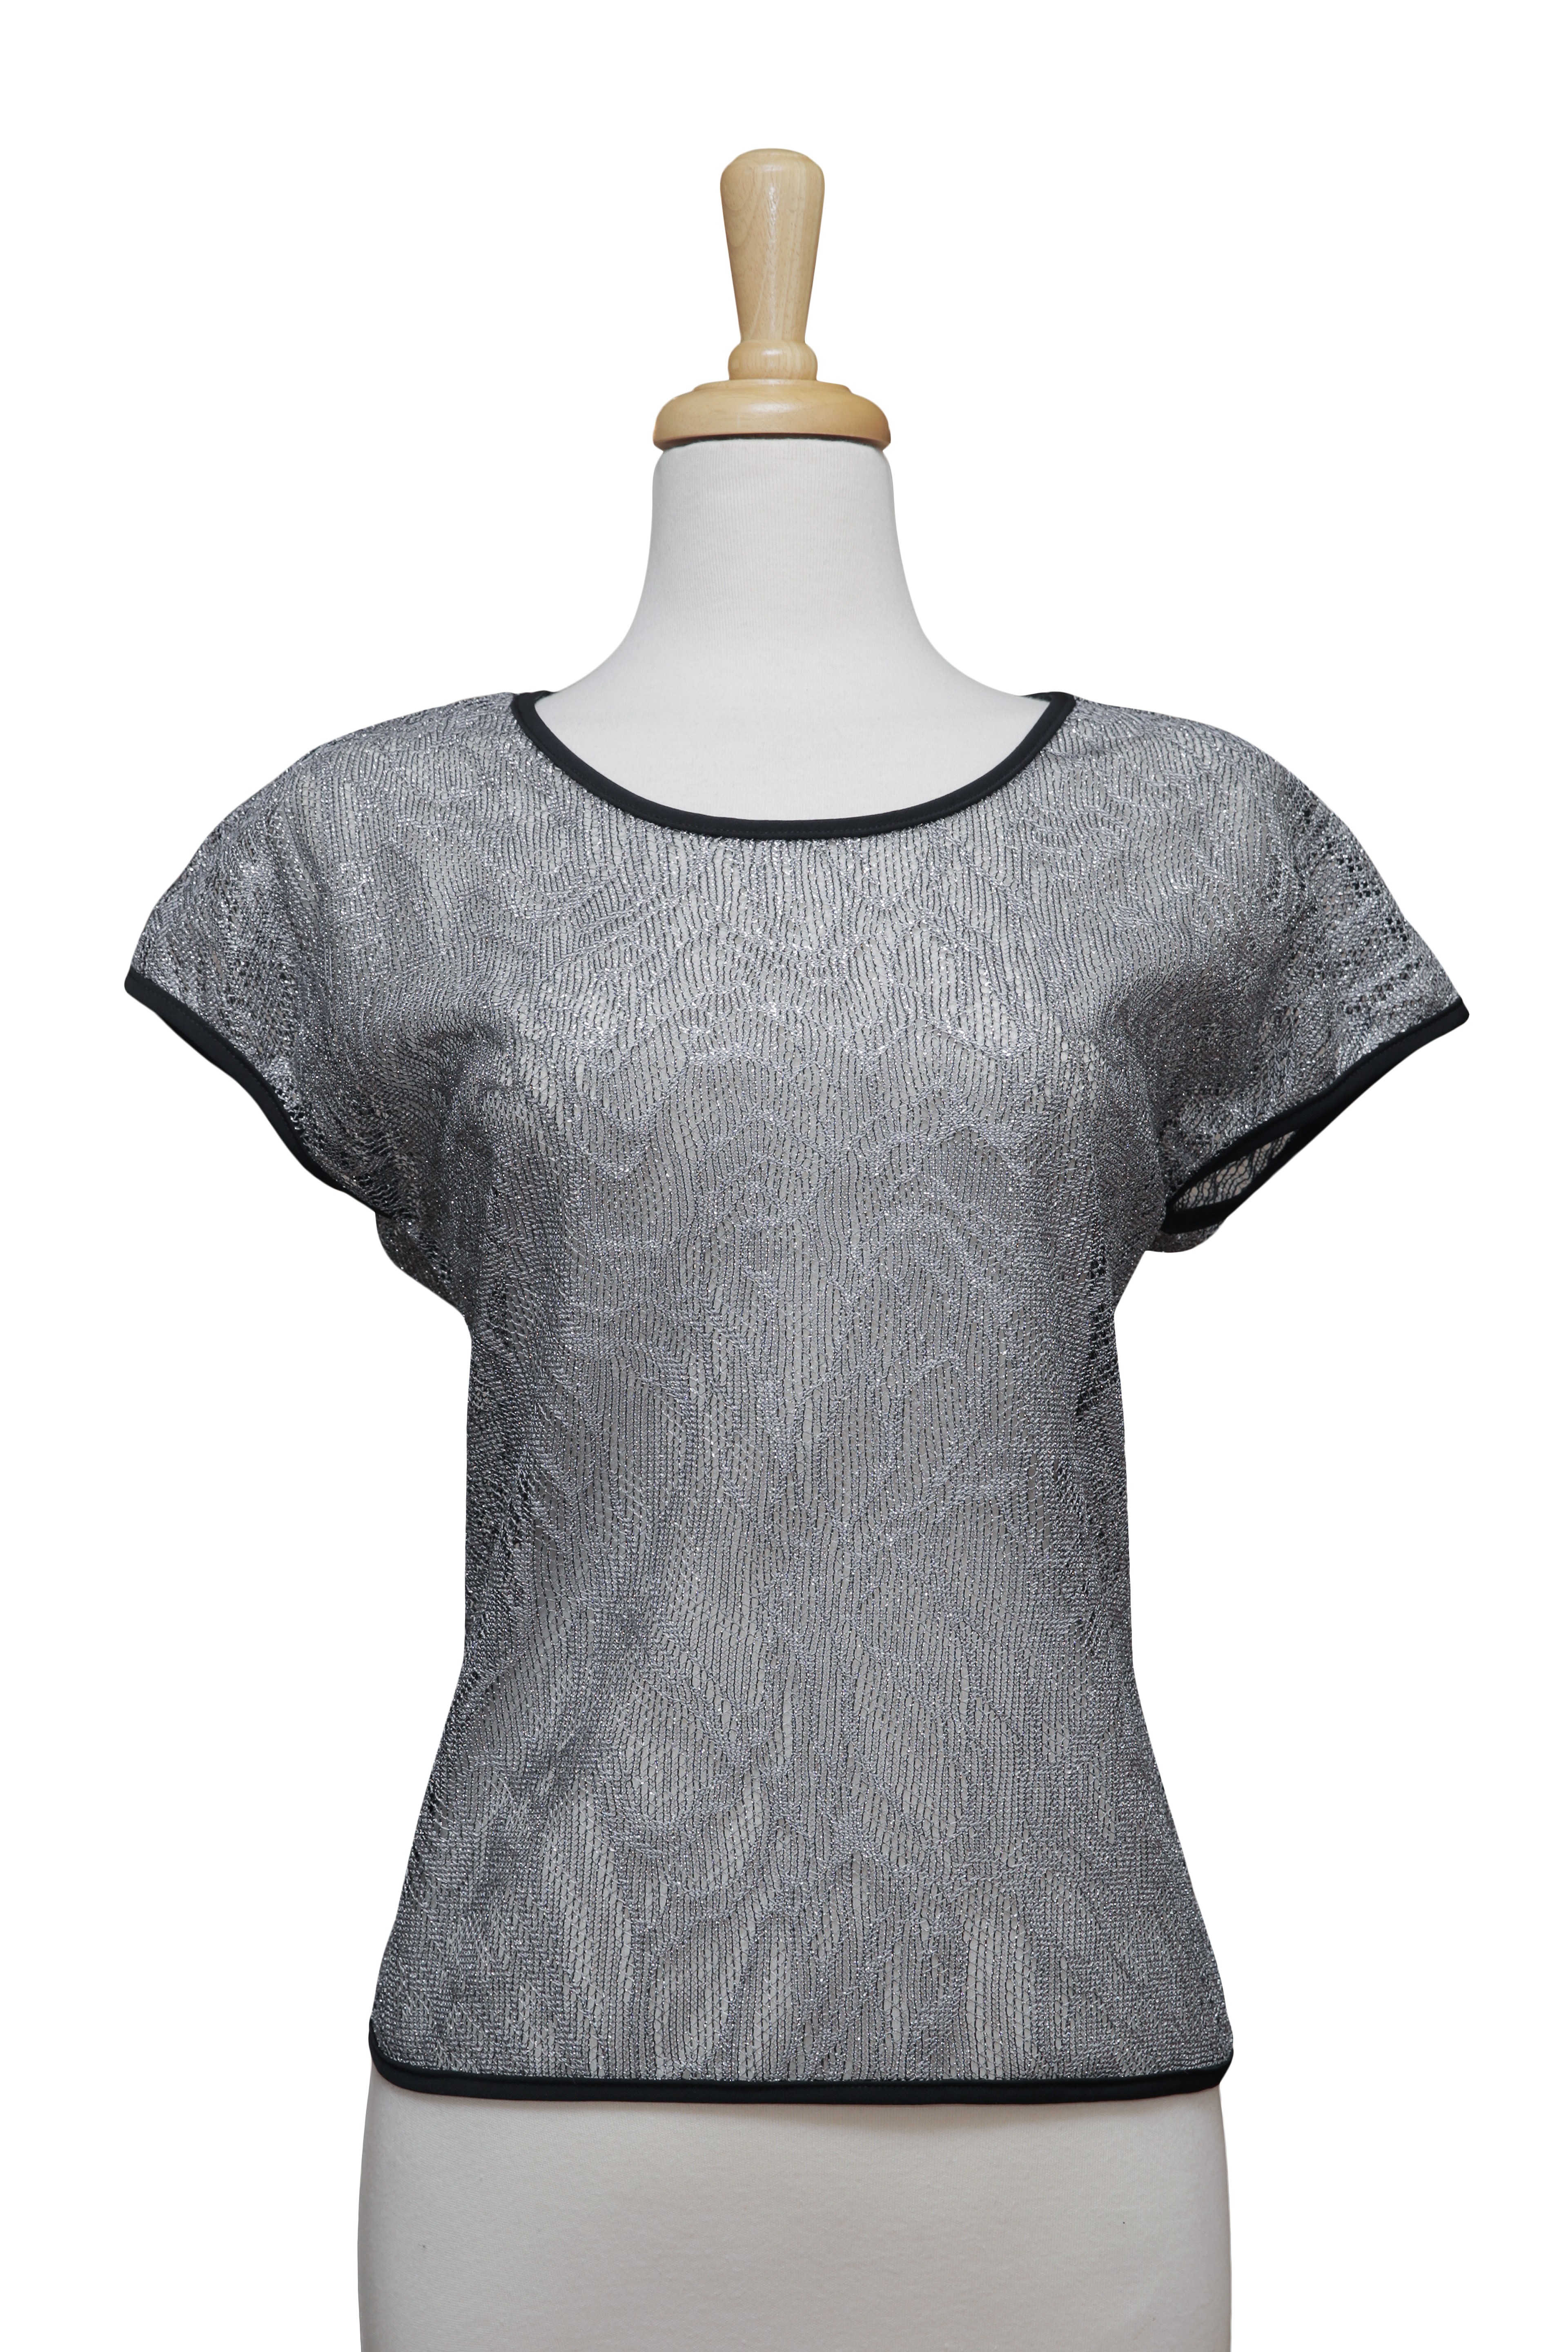 Metallic Silver Lace Knit  Short Sleeve Top